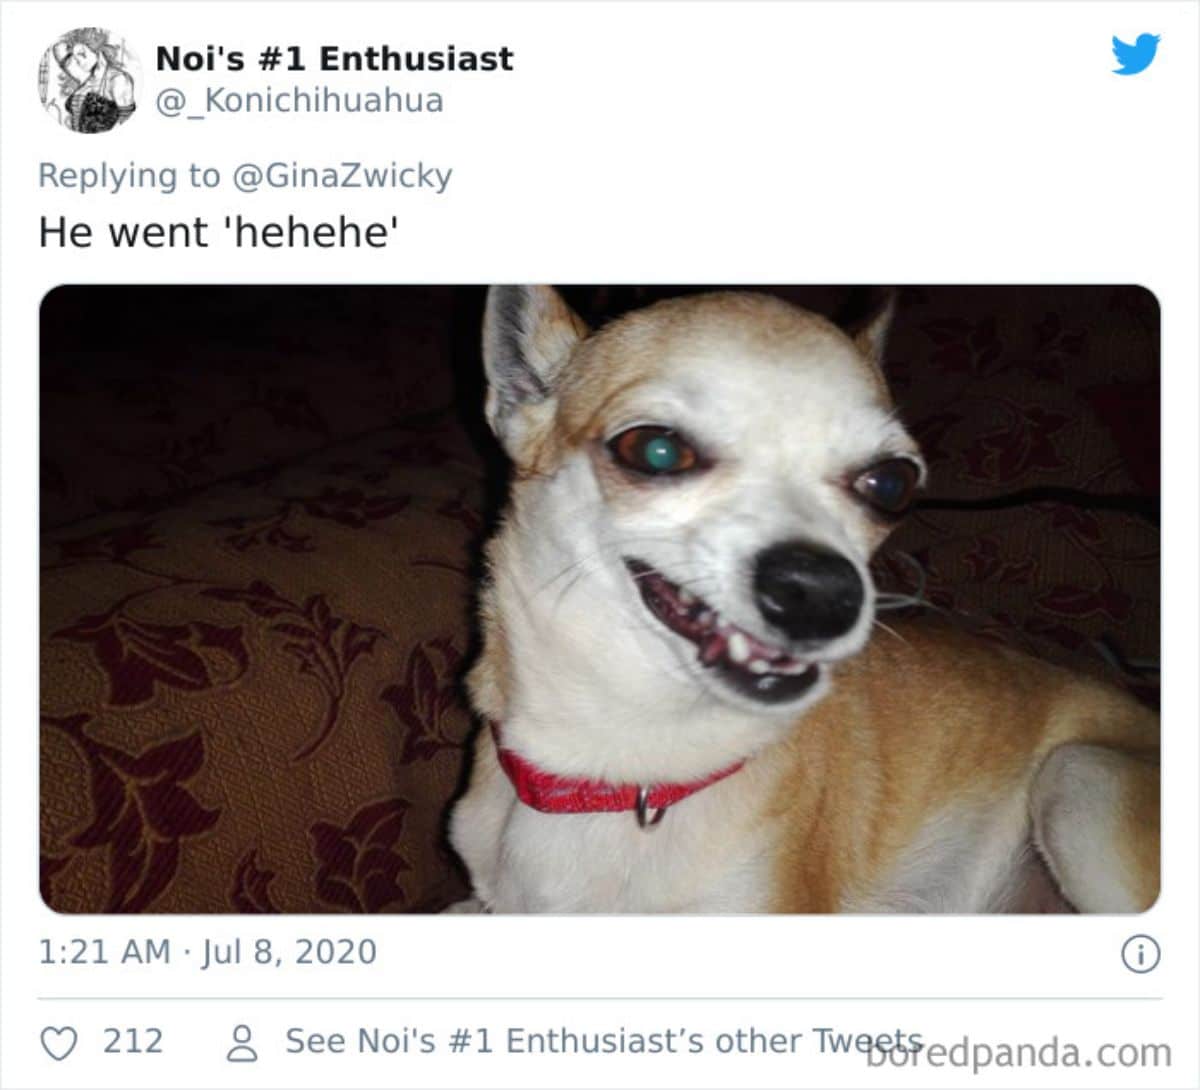 tweet of a brown and white dog looking at the camera with its mouth open and teeth showing